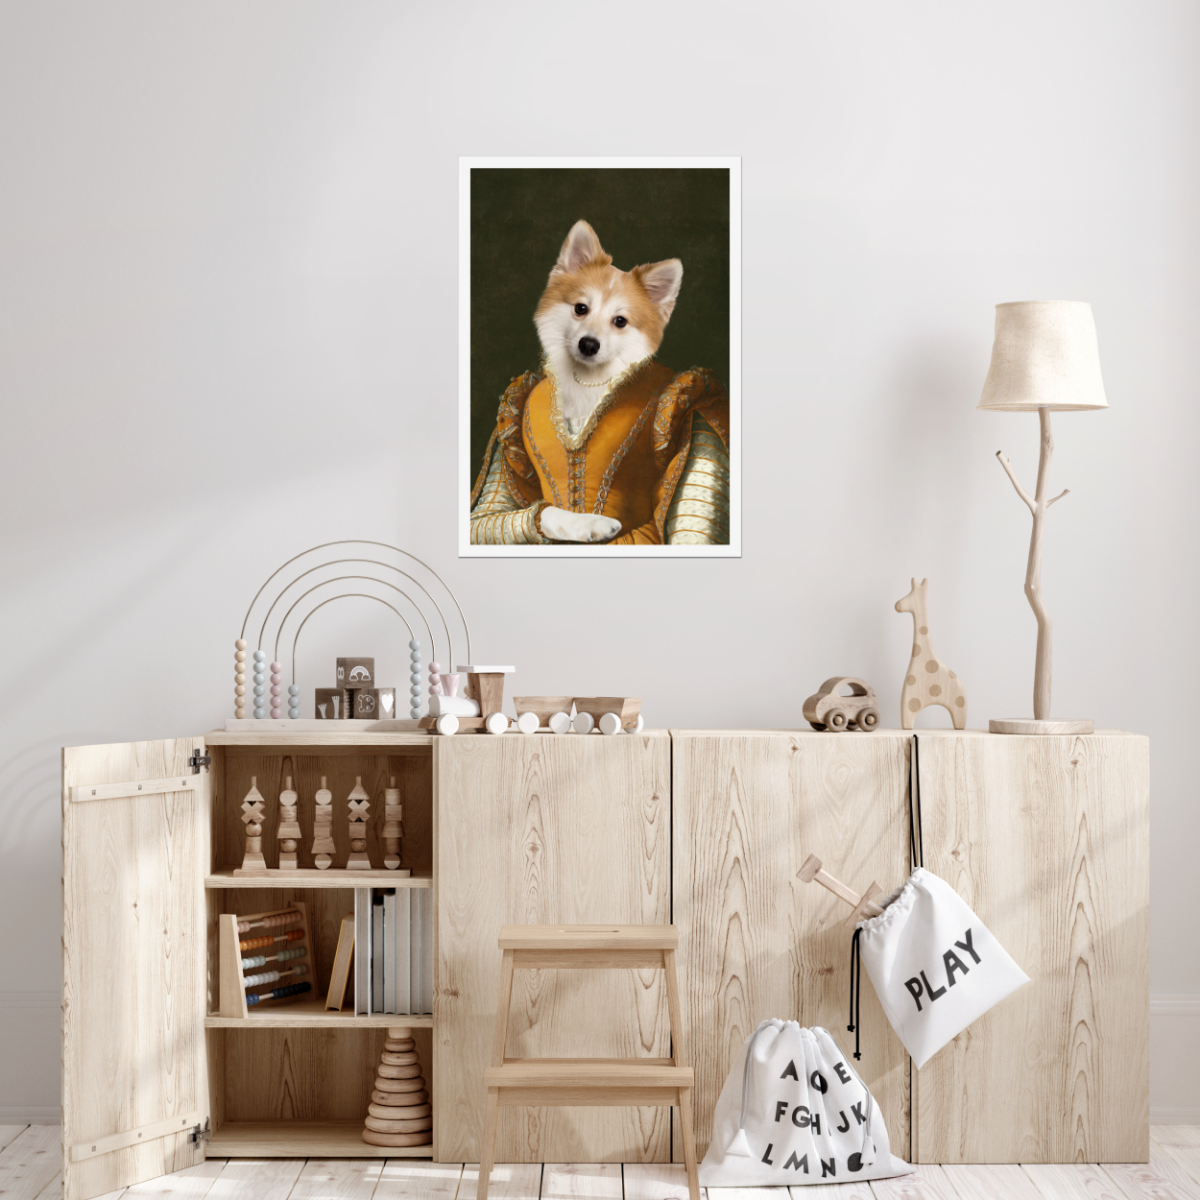 The Classy Lady: Custom Pet Poster - Paw & Glory - #pet portraits# - #dog portraits# - #pet portraits uk#Paw & Glory, paw and glory, dog renaissance paintings stained glass pet portraits pet painting gift best pet canvas art online pet portraits watercolour dog portraits pet portraits